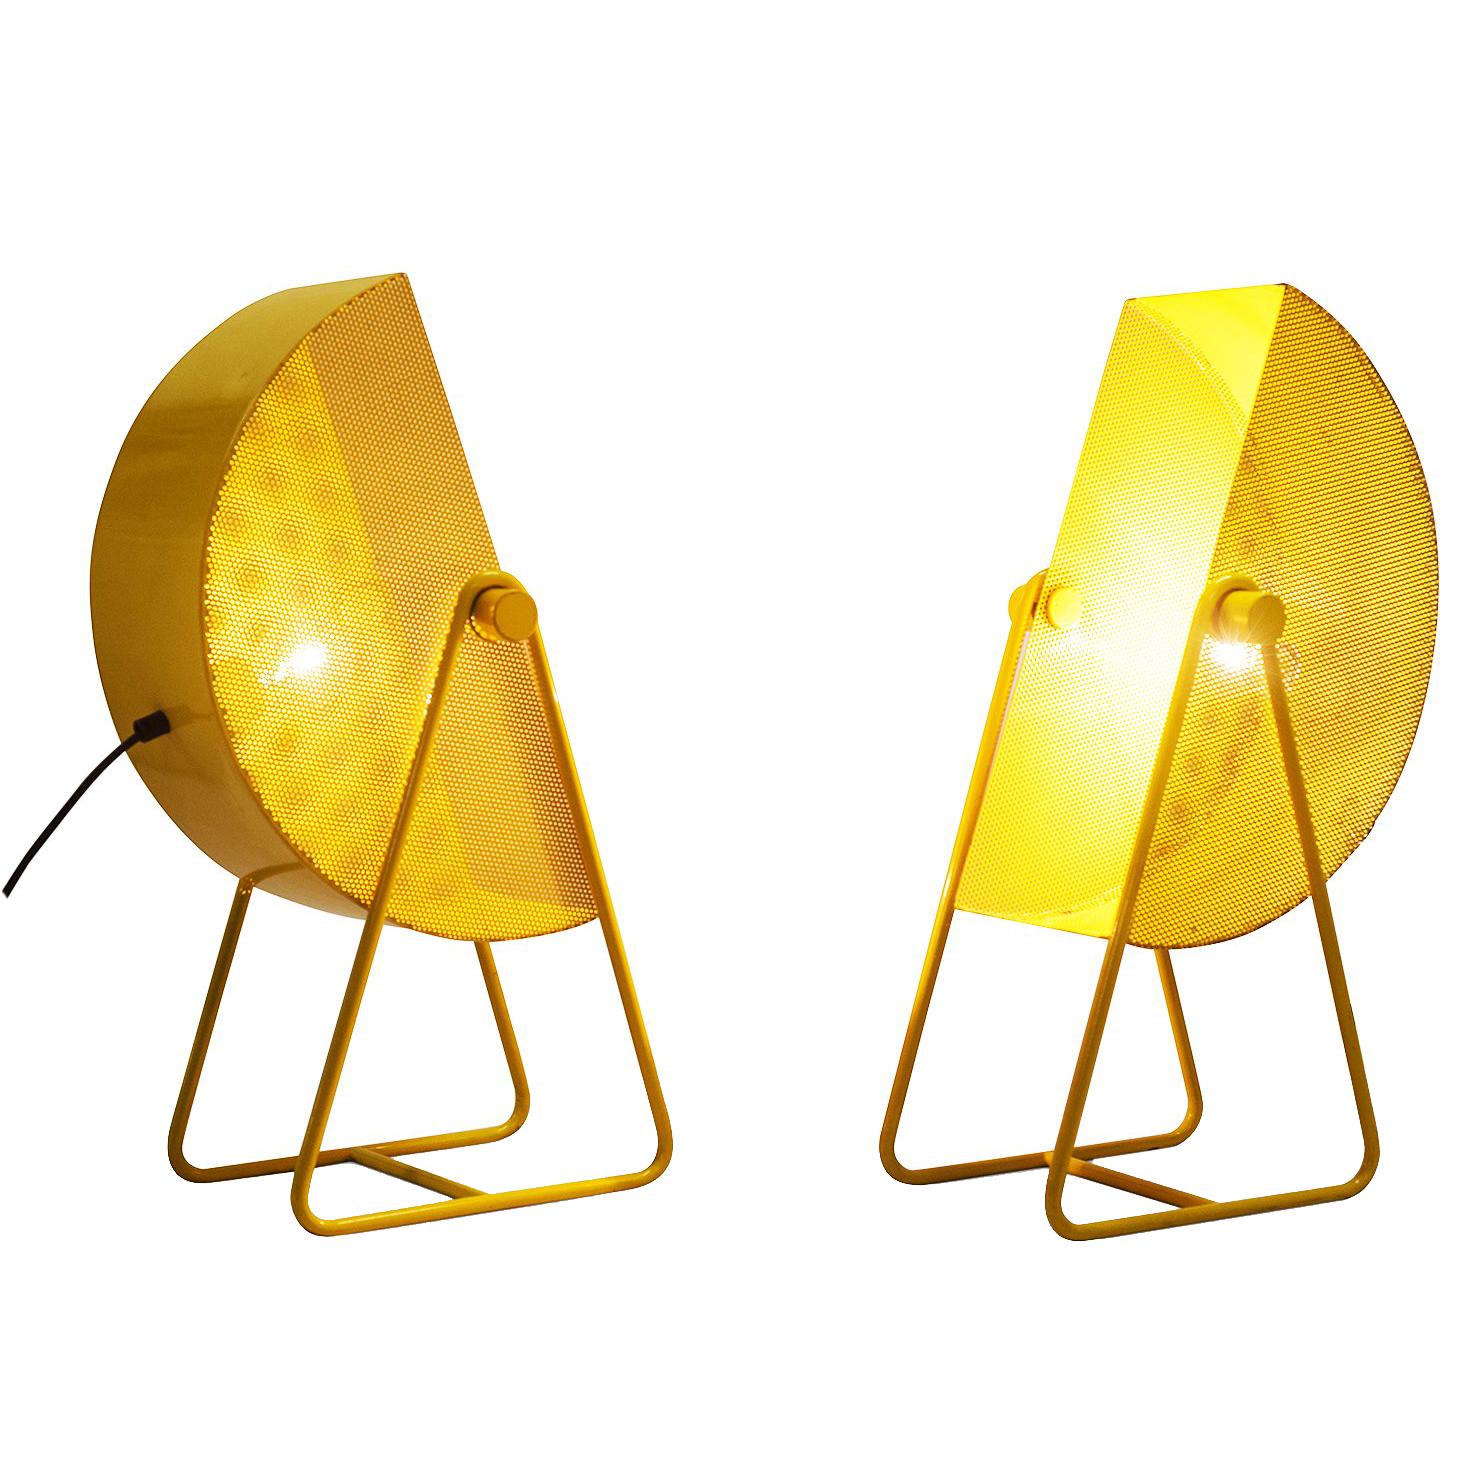 Bieffeplast Yellow Table Lamps with Adjustable Shades, 1970s